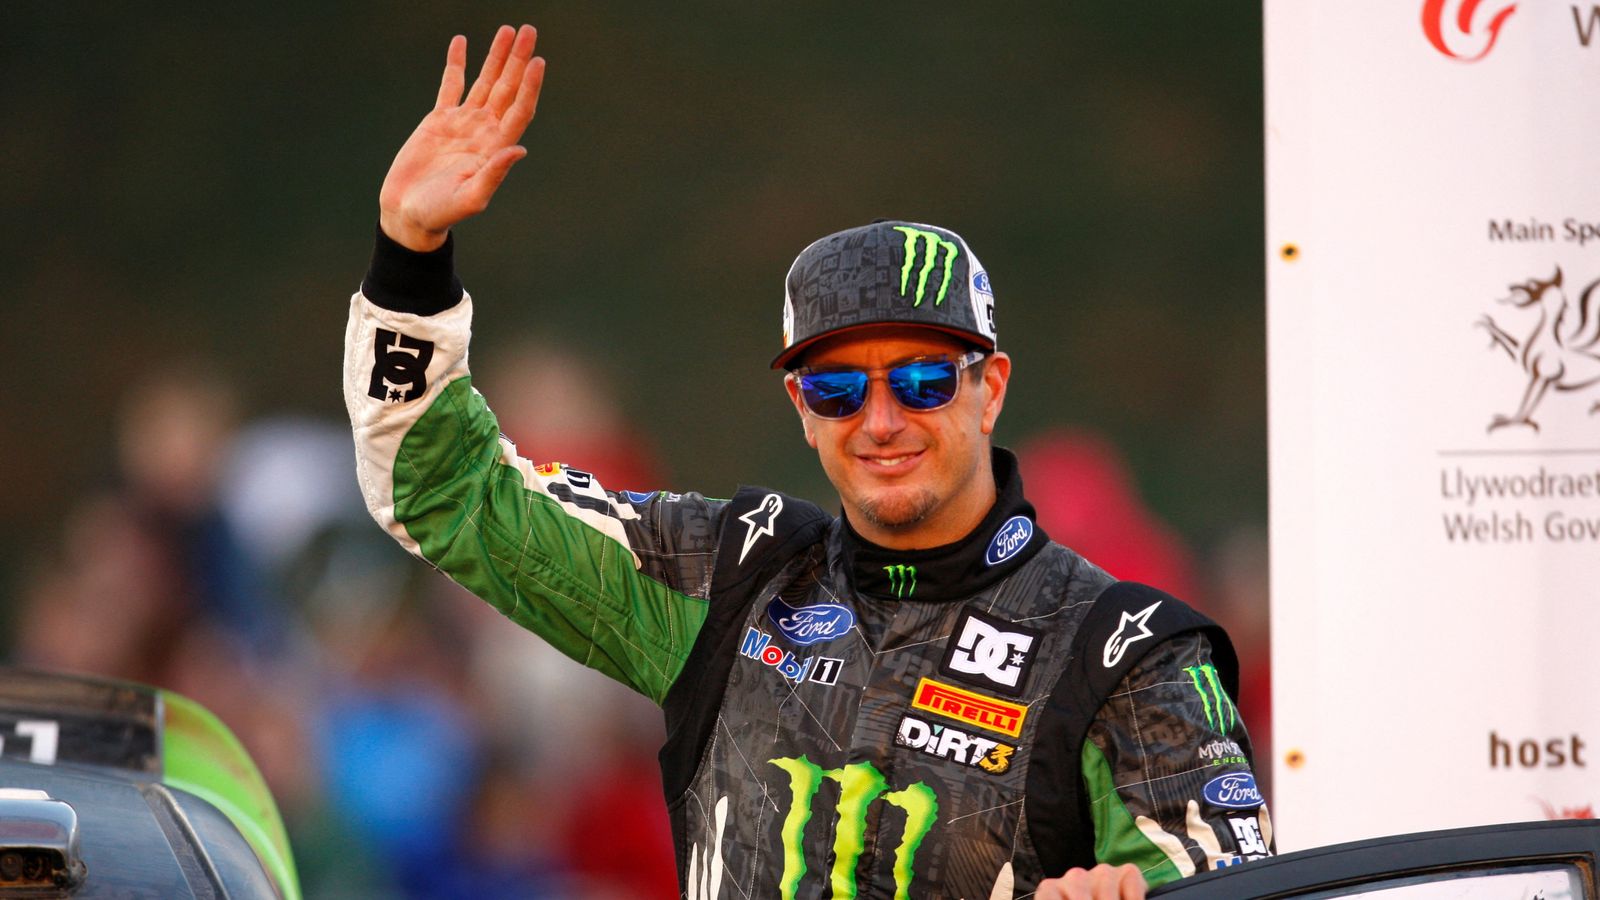 Ken Block: Rally driver and YouTube star dies in snowmobile accident